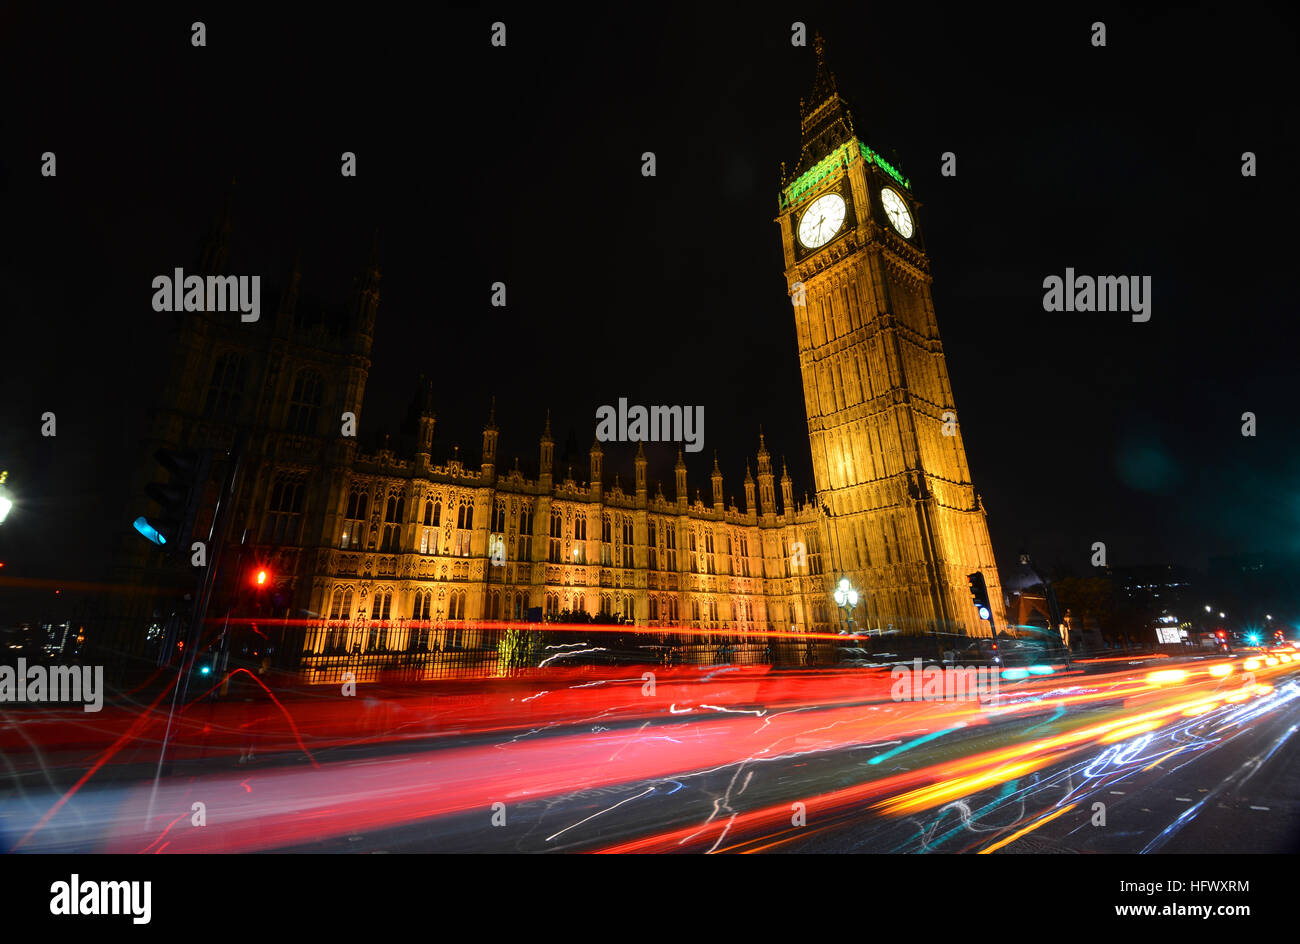 Big Ben tower, Westminster Palace, London, UK, at night with car trails Stock Photo